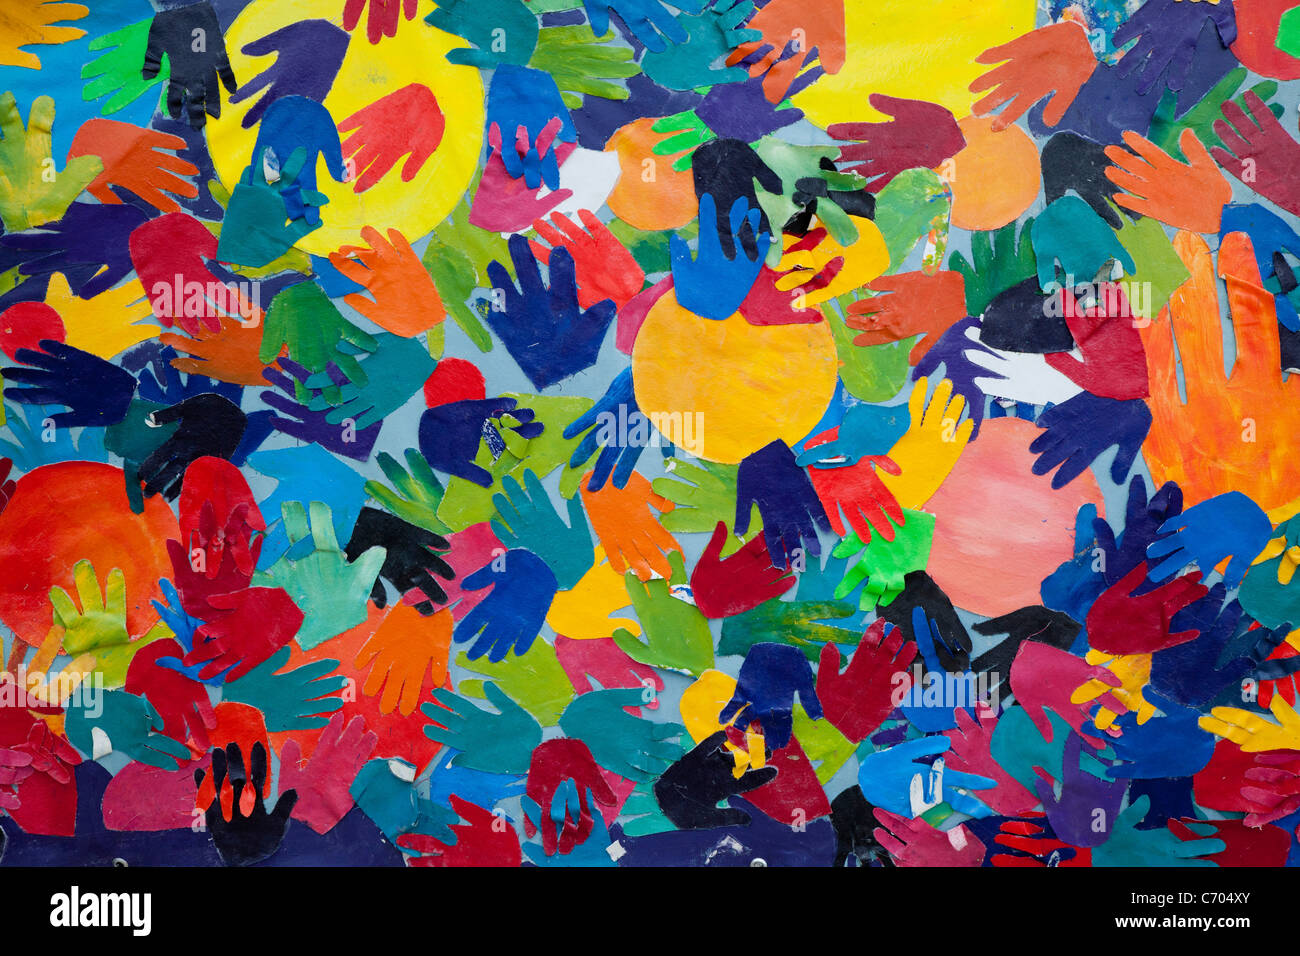 Detroit, Michigan - Artwork showing colorful hands displayed along the Detroit River Walk. Stock Photo